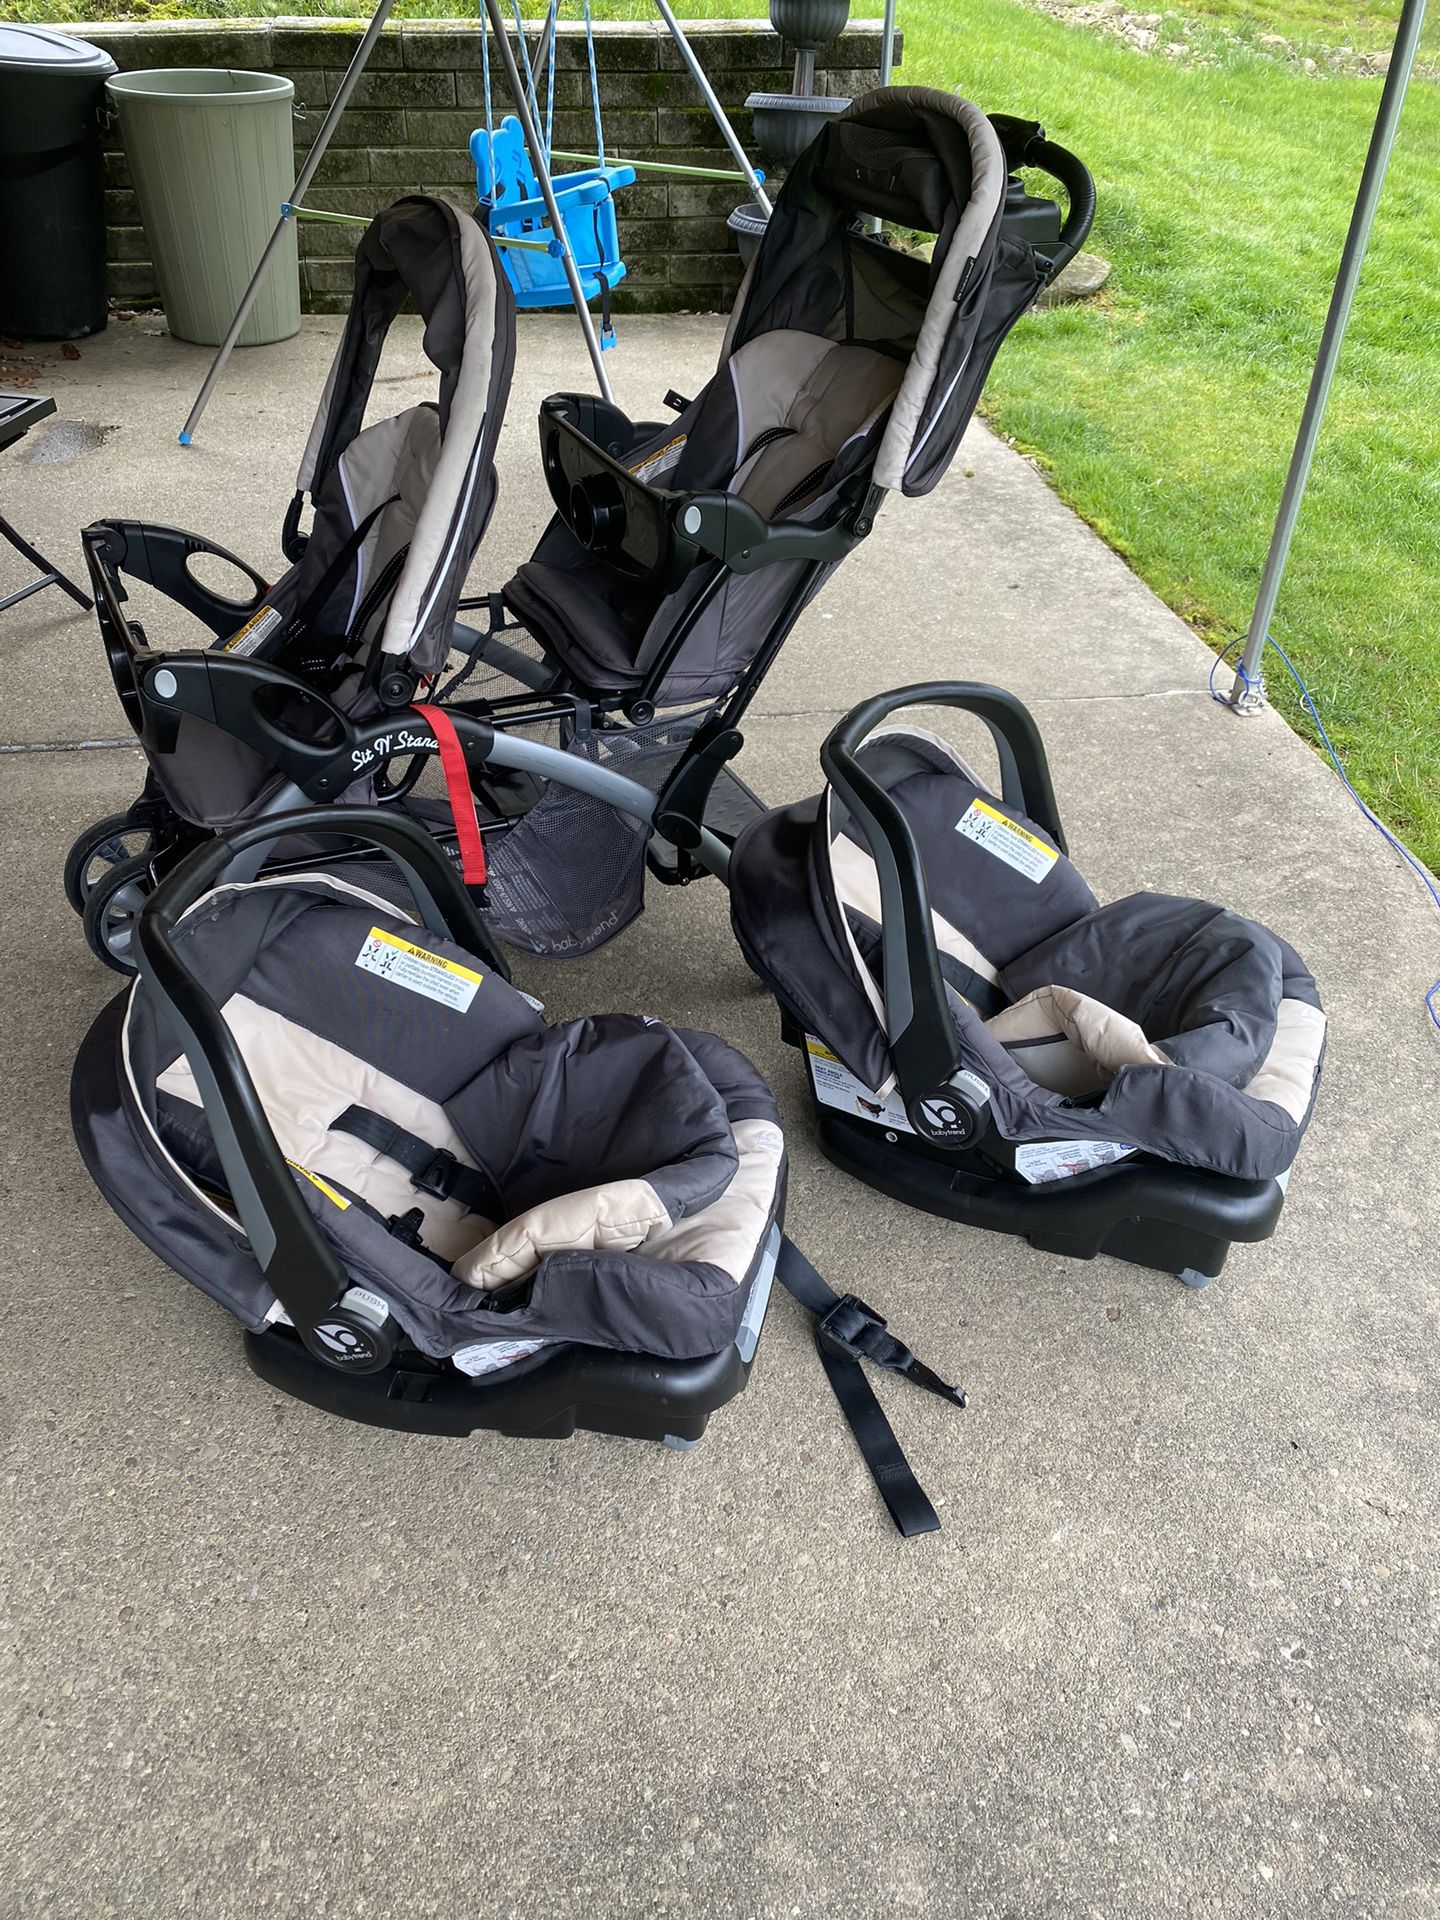 Double Stroller and Car Seats